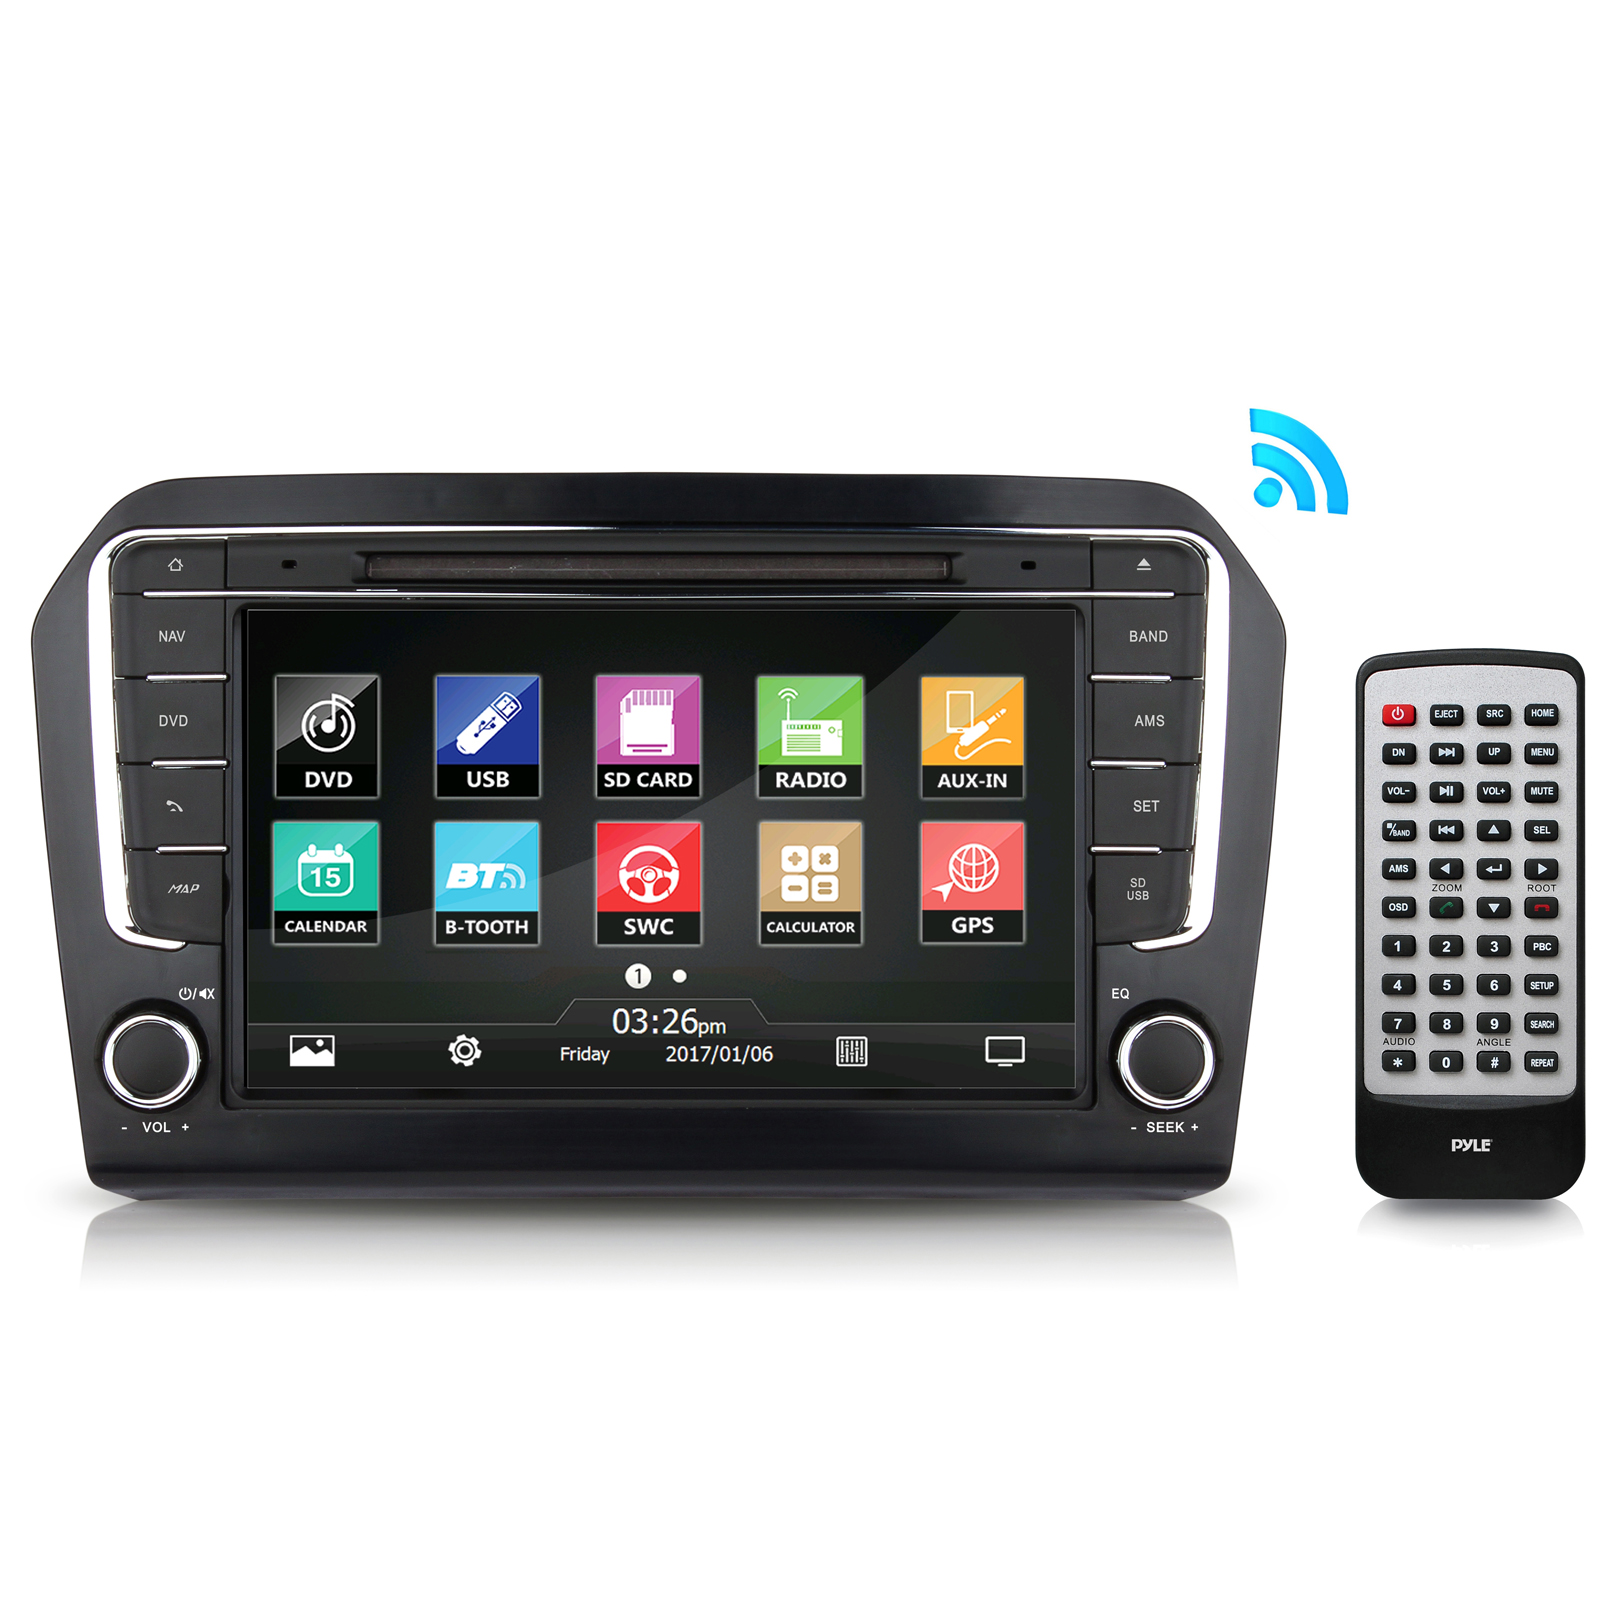 PYLE PVWJETTA13 - 2013 VW Jetta Factory OEM Replacement Stereo Receiver, Plug-and-Play Direct Fitment Radio Headunit - image 1 of 4